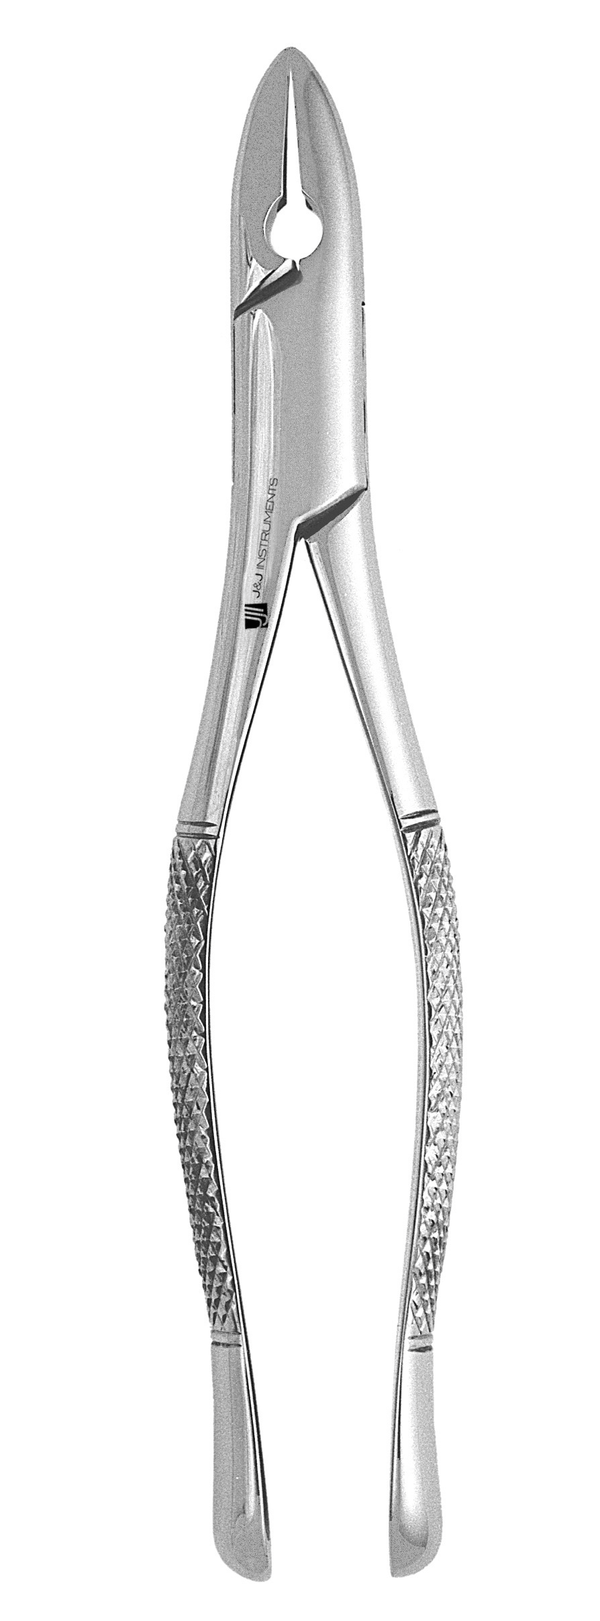 Extracting Forceps - HBP